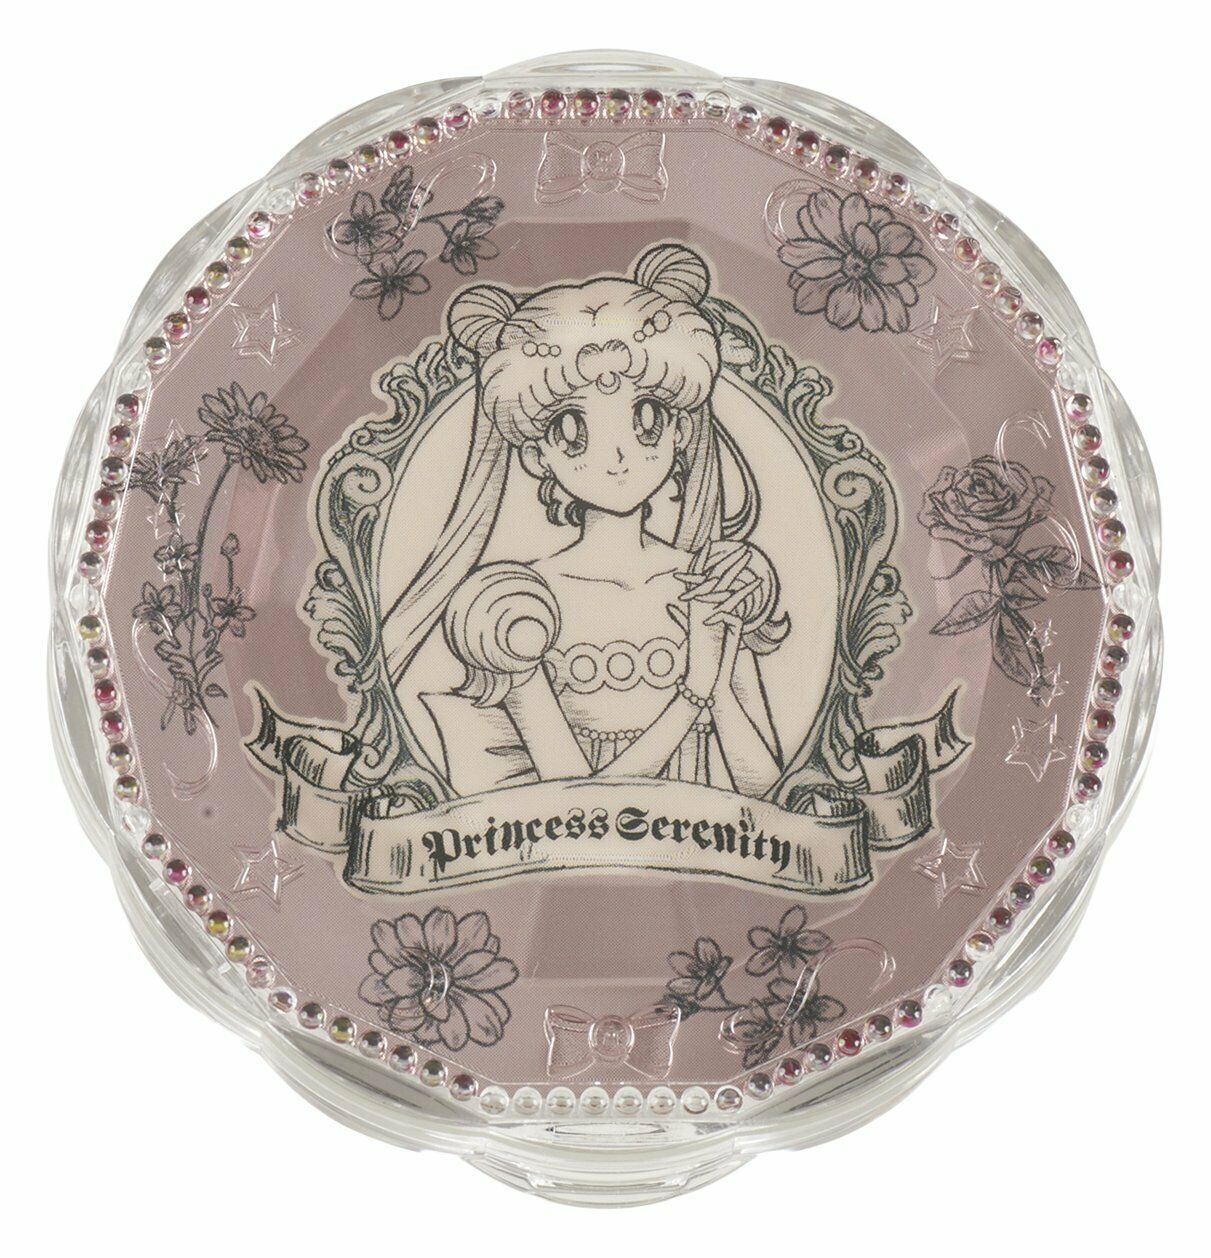 Sailor-Moon - Miracle romance : Clear Compact Face Powder